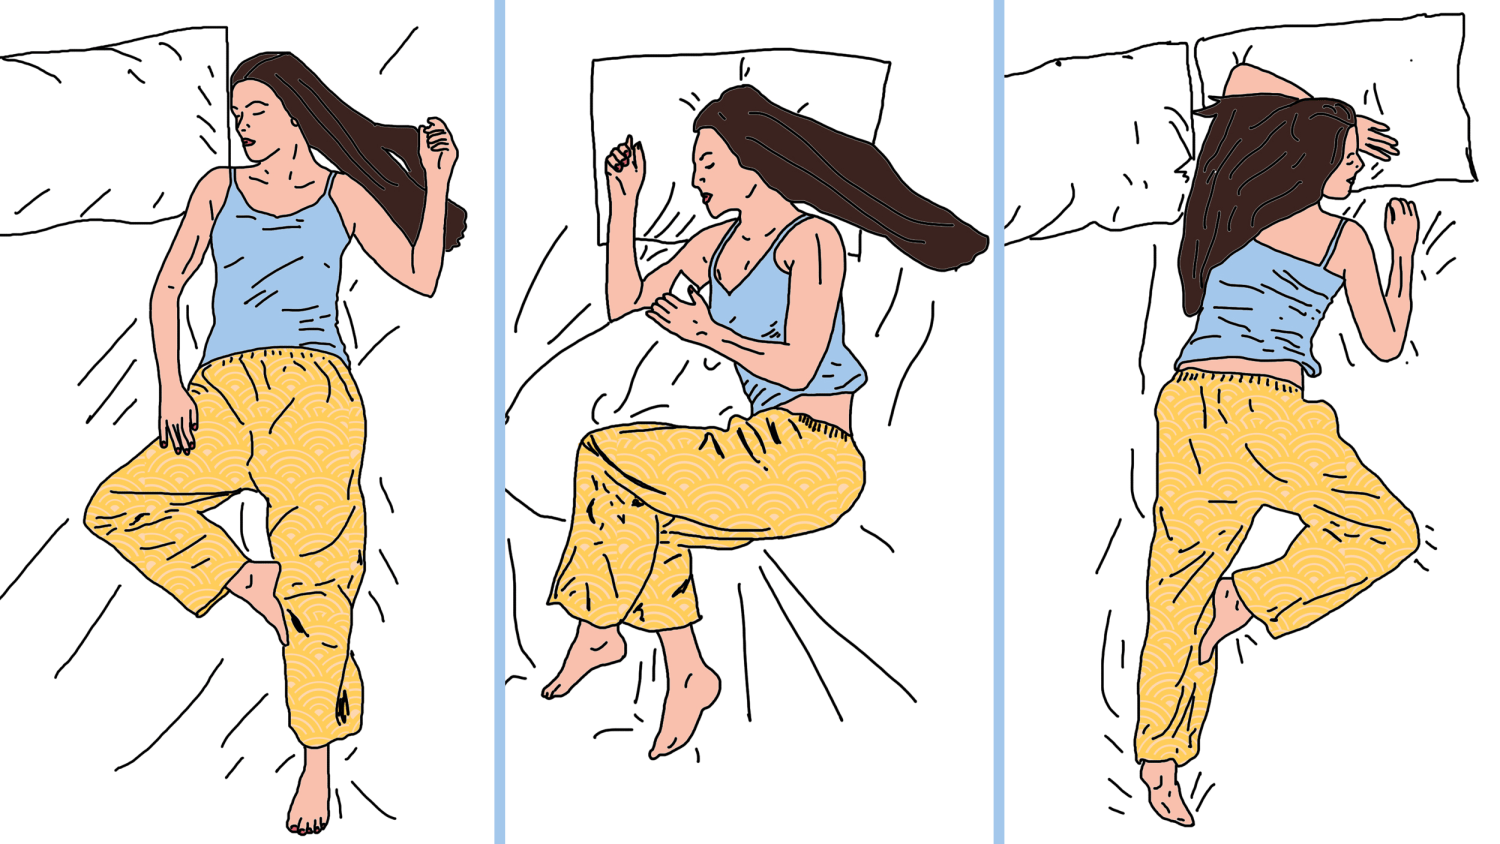 The Best Sleep Positions For a Good Night's Rest